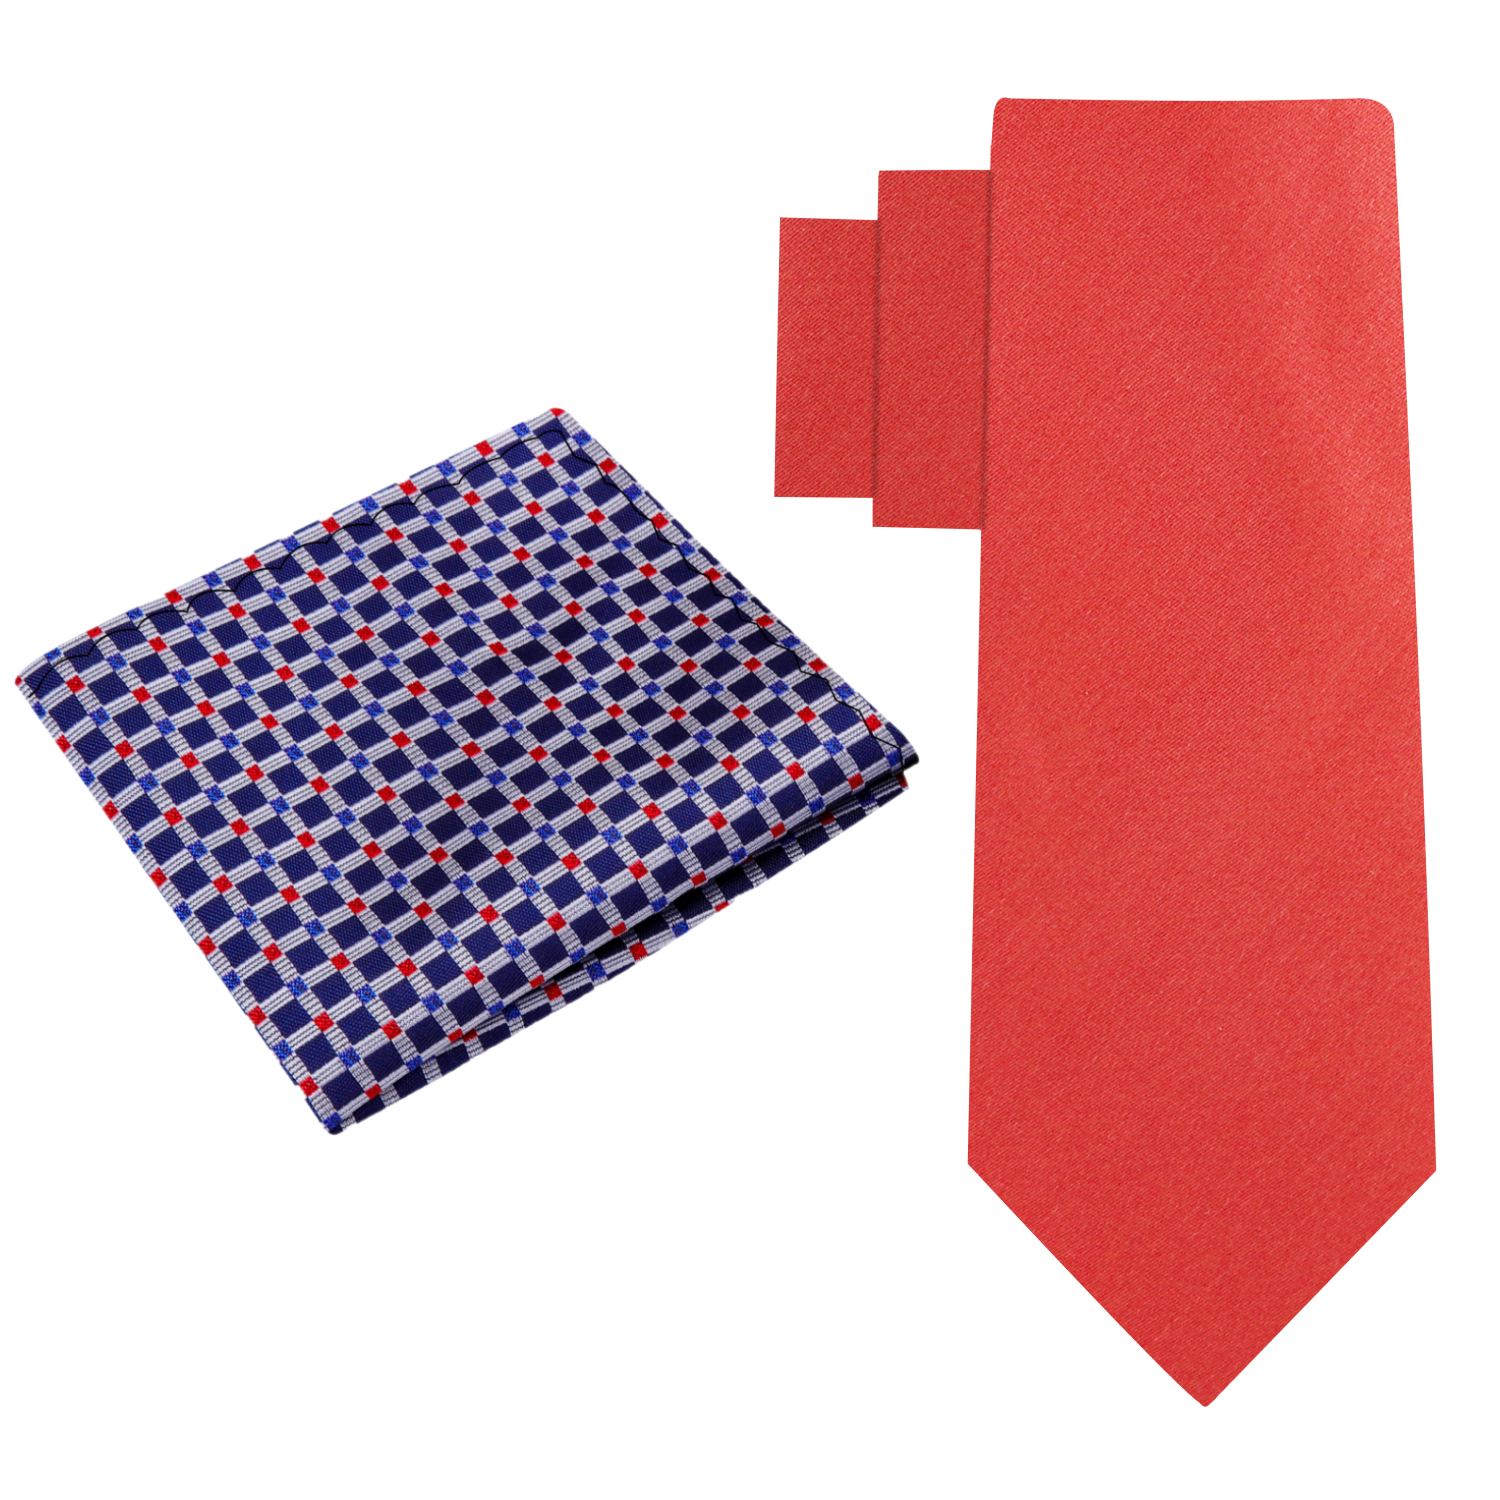 Alt View: Solid Red Square Necktie and Accenting Dark Blue, Grey and Red Small Check Square